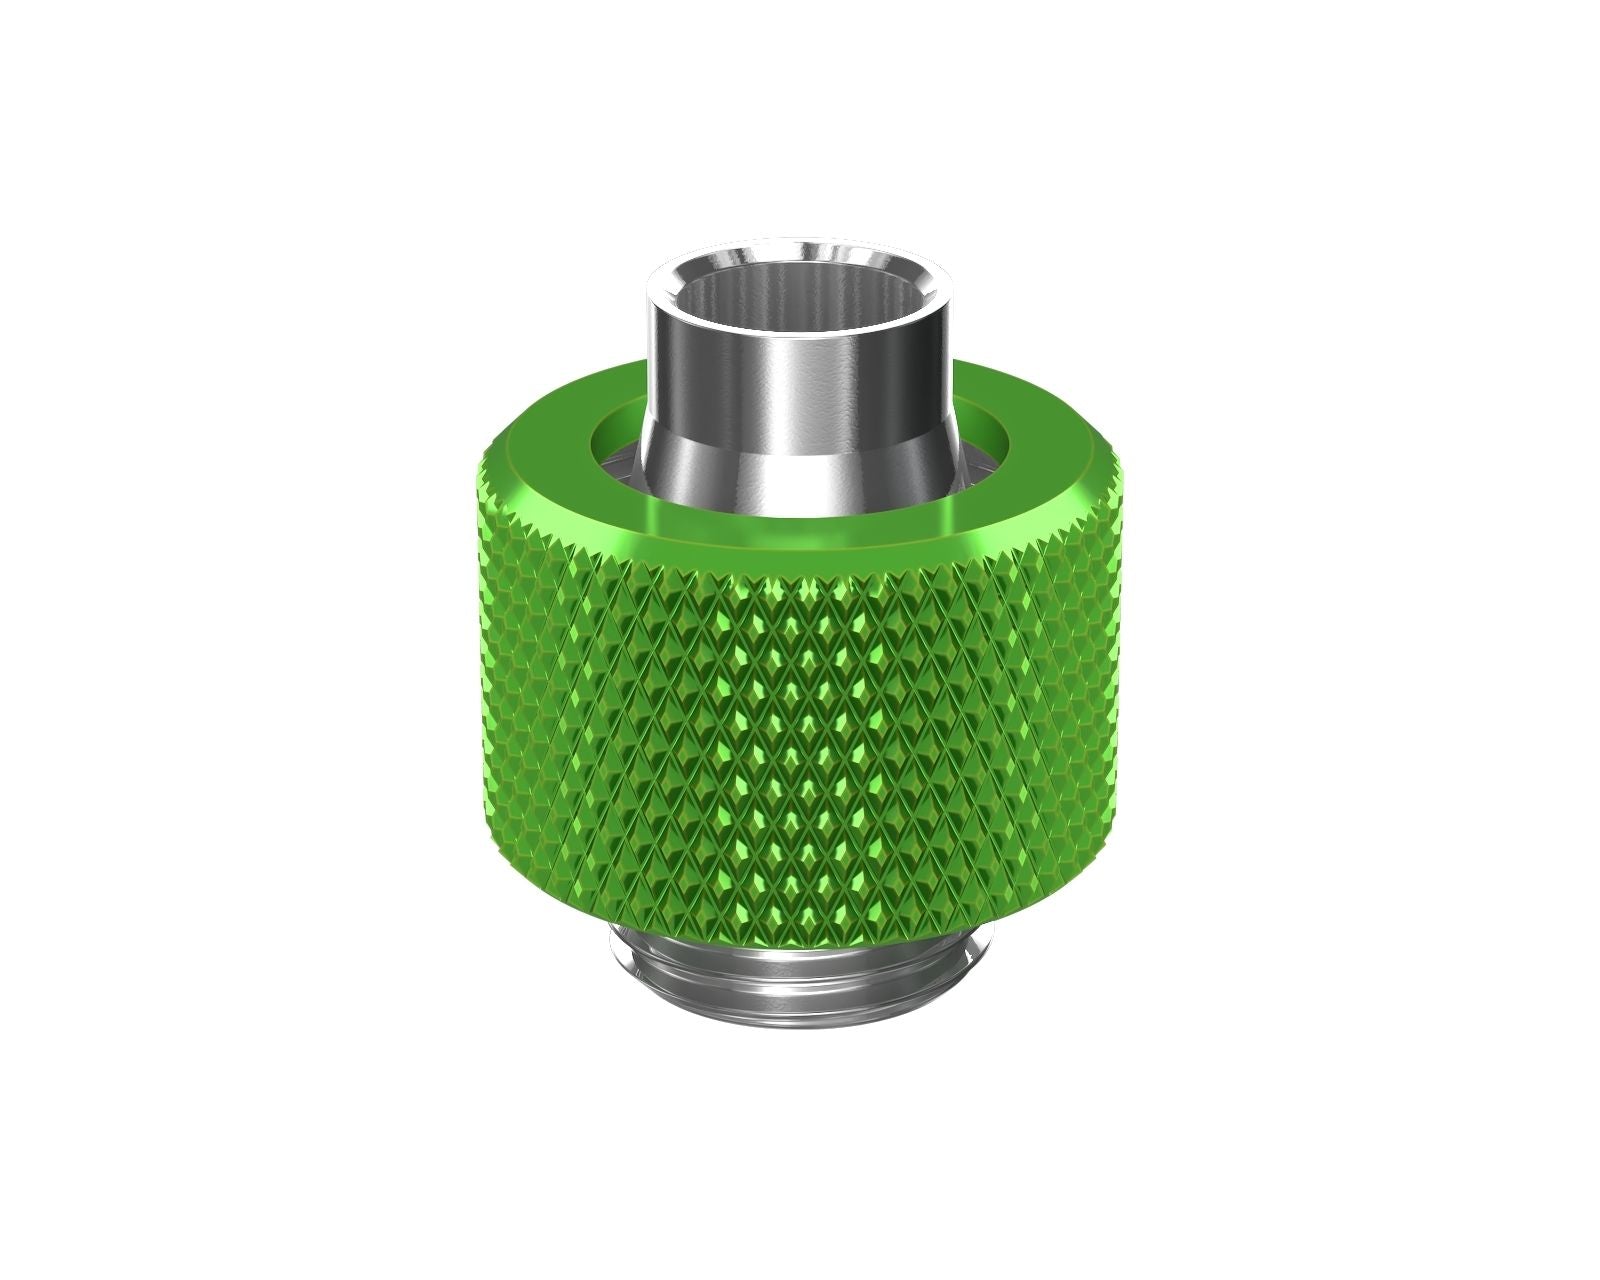 PrimoChill SecureFit SX - Premium Compression Fitting For 3/8in ID x 1/2in OD Flexible Tubing (F-SFSX12) - Available in 20+ Colors, Custom Watercooling Loop Ready - Toxic Candy